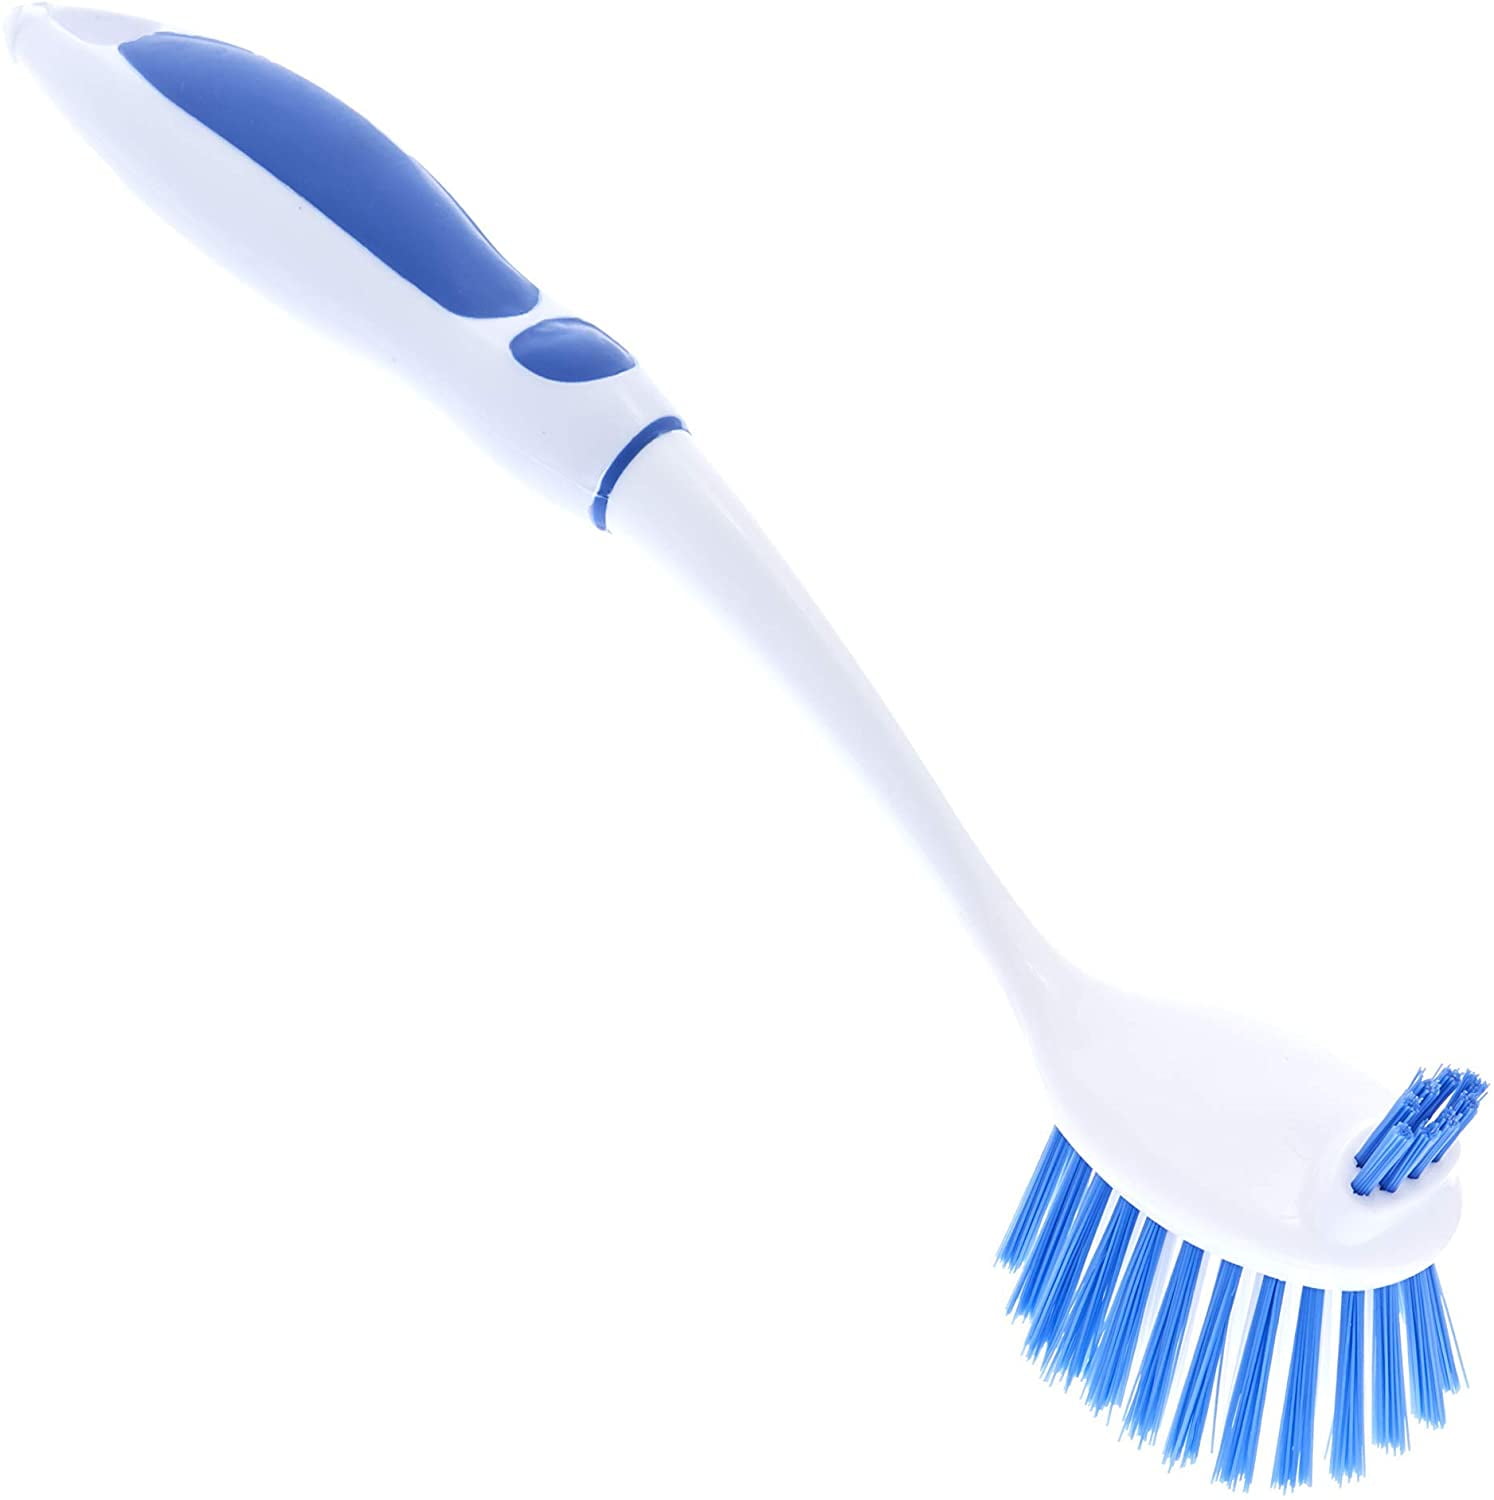 Bcooss Floor Scrub Brush with Long Handle for Cleaning 2 in 1 Scrape and Stiff Bristle Scrubber Brush, White